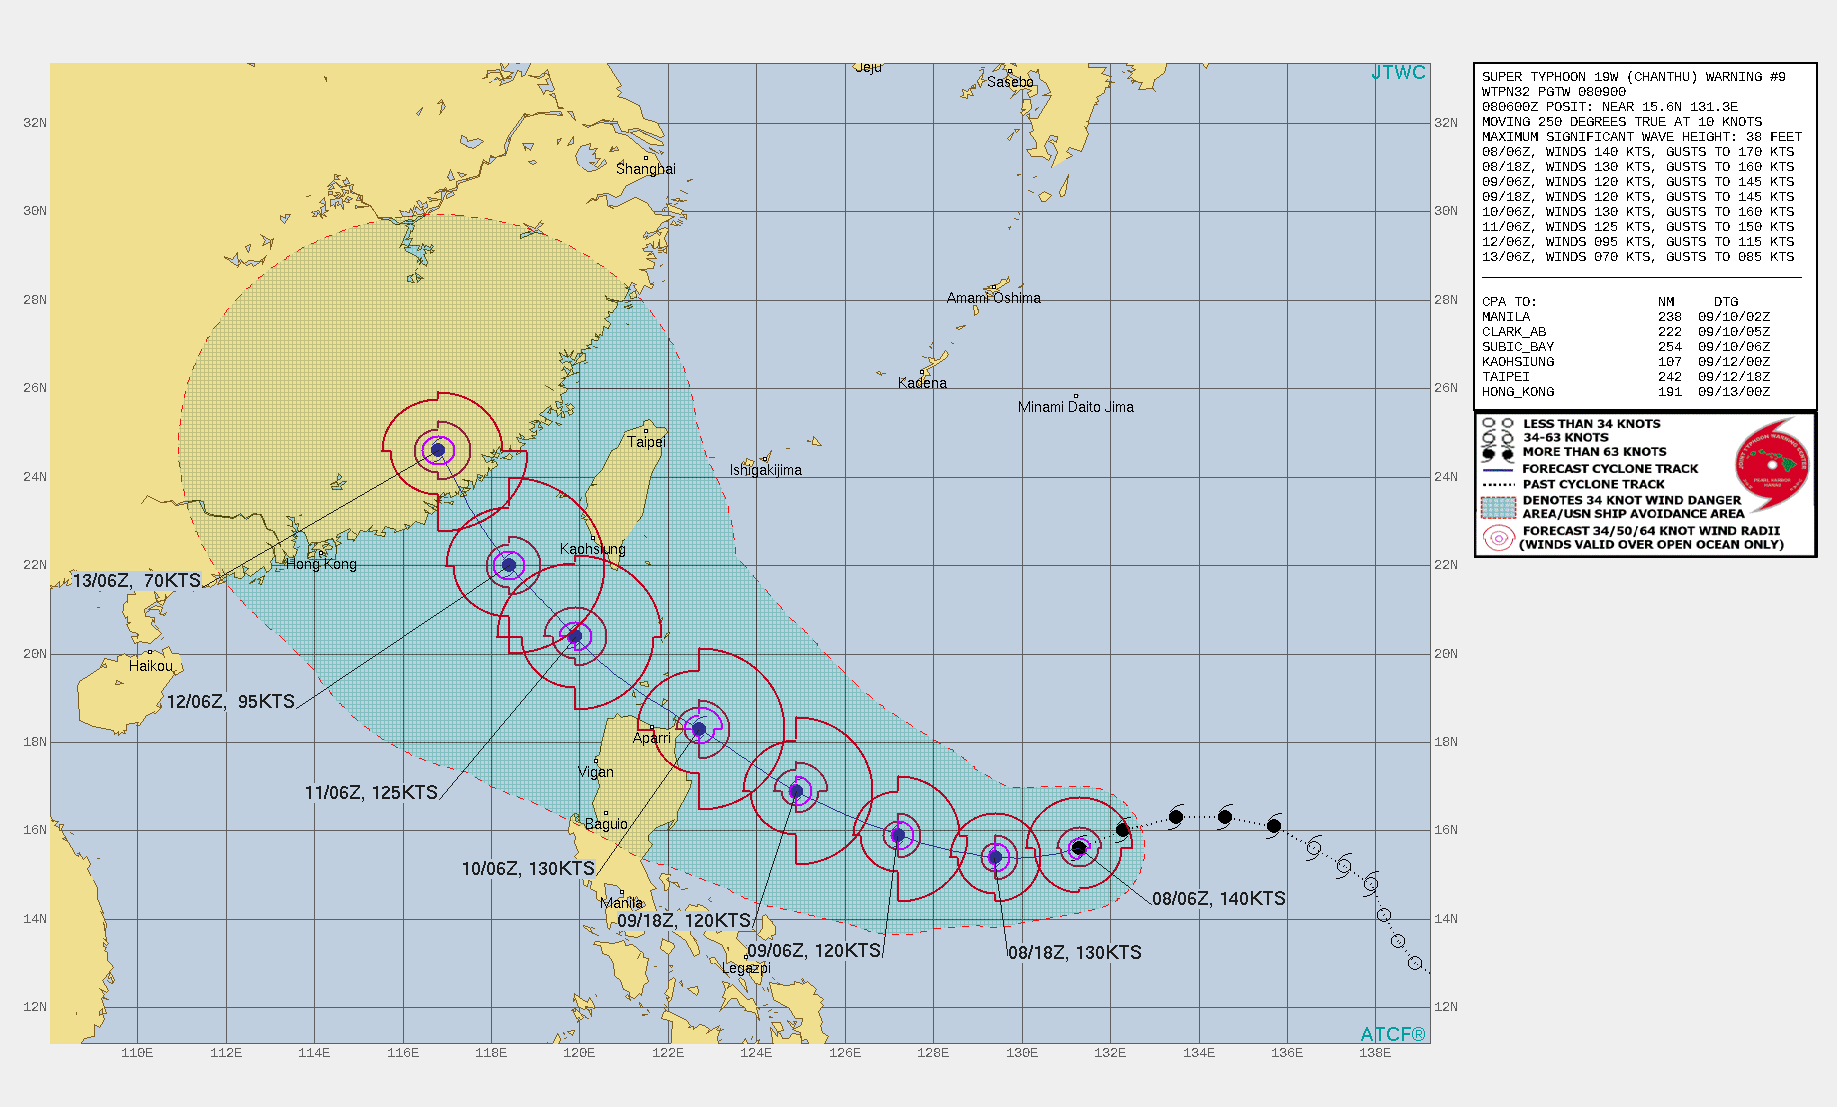 STY 19W(CHANTHU). WARNING 9 ISSUED AT 08/09UTC.SIGNIFICANT FORECAST CHANGES: THERE ARE NO SIGNIFICANT CHANGES TO THE FORECAST FROM THE PREVIOUS WARNING.  FORECAST DISCUSSION: STY 19W IS FORECAST TO TURN TO A MORE WESTWARD TRACK OVER THE NEXT 12 HOURS, AND INITIAL SIGNS OF THIS OCCURRENCE ARE ALREADY BEING SEEN IN ANIMATED MSI THROUGH THE 0800Z HOUR. BEYOND 12H THE SUBTROPICAL RIDGE(STR) IS FORECAST TO MOVE EAST RESULTING IN A MORE SOUTHEAST-NORTHWEST ORIENTATION ALONG ITS SOUTHWEST PERIPHERY, ALLOWING STY 19W TO GRADUALLY TURN MORE NORTHWESTWARD THROUGH  48H. THE SYSTEM IS EXPECTED TO SKIRT THE NORTHEAST TIP OF LUZON BY 48H, AND ENTER THE LUZON STRAIT BY 72H. WHILE GLOBAL MODEL FIELDS SHOW PRIMARILY ZONAL FLOW ACROSS CENTRAL CHINA, THE ORIENTATION OF THE STR TO THE EAST AND A DEVELOPING STR OVER SOUTHERN CHINA INDUCE A WEAKNESS IN THE RIDGE NORTHWEST OF TAIWAN, WHICH WILL ALLOW STY 19W TO TURN NORTHWEST AFTER 72H AND HEAD TOWARDS A LANDFALL ALONG THE SOUTHEAST COAST OF CHINA BETWEEN   96H AND 120H. STY 19W HAS LIKELY REACHED PEAK INTENSITY. AN EYEWALL REPLACEMENT CYCLE(EWRC) IS FORECASTED TO START IMMINENTLY, WHICH WILL LEAD TO RELATIVELY RAPID WEAKENING THROUGH 24H, DOWN TO 120 KNOTS/CAT 4. AFTER COMPLETION OF THE EWRC THE SYSTEM IS EXPECTED TO INTENSIFY ONCE AGAIN TO A PEAK OF 130 KNOTS/CAT 4 AT 48H. THEREAFTER INCREASING MID-LEVEL SHEAR AND COOLER SSTS WILL OFFSET INCREASED POLEWARD OUTFLOW LEADING TO STEADY WEAKENING THROUGH LANDFALL. ONCE OVER LAND THE SYSTEM WILL RAPIDLY WEAKEN DUE TO TERRAIN INFLUENCES.